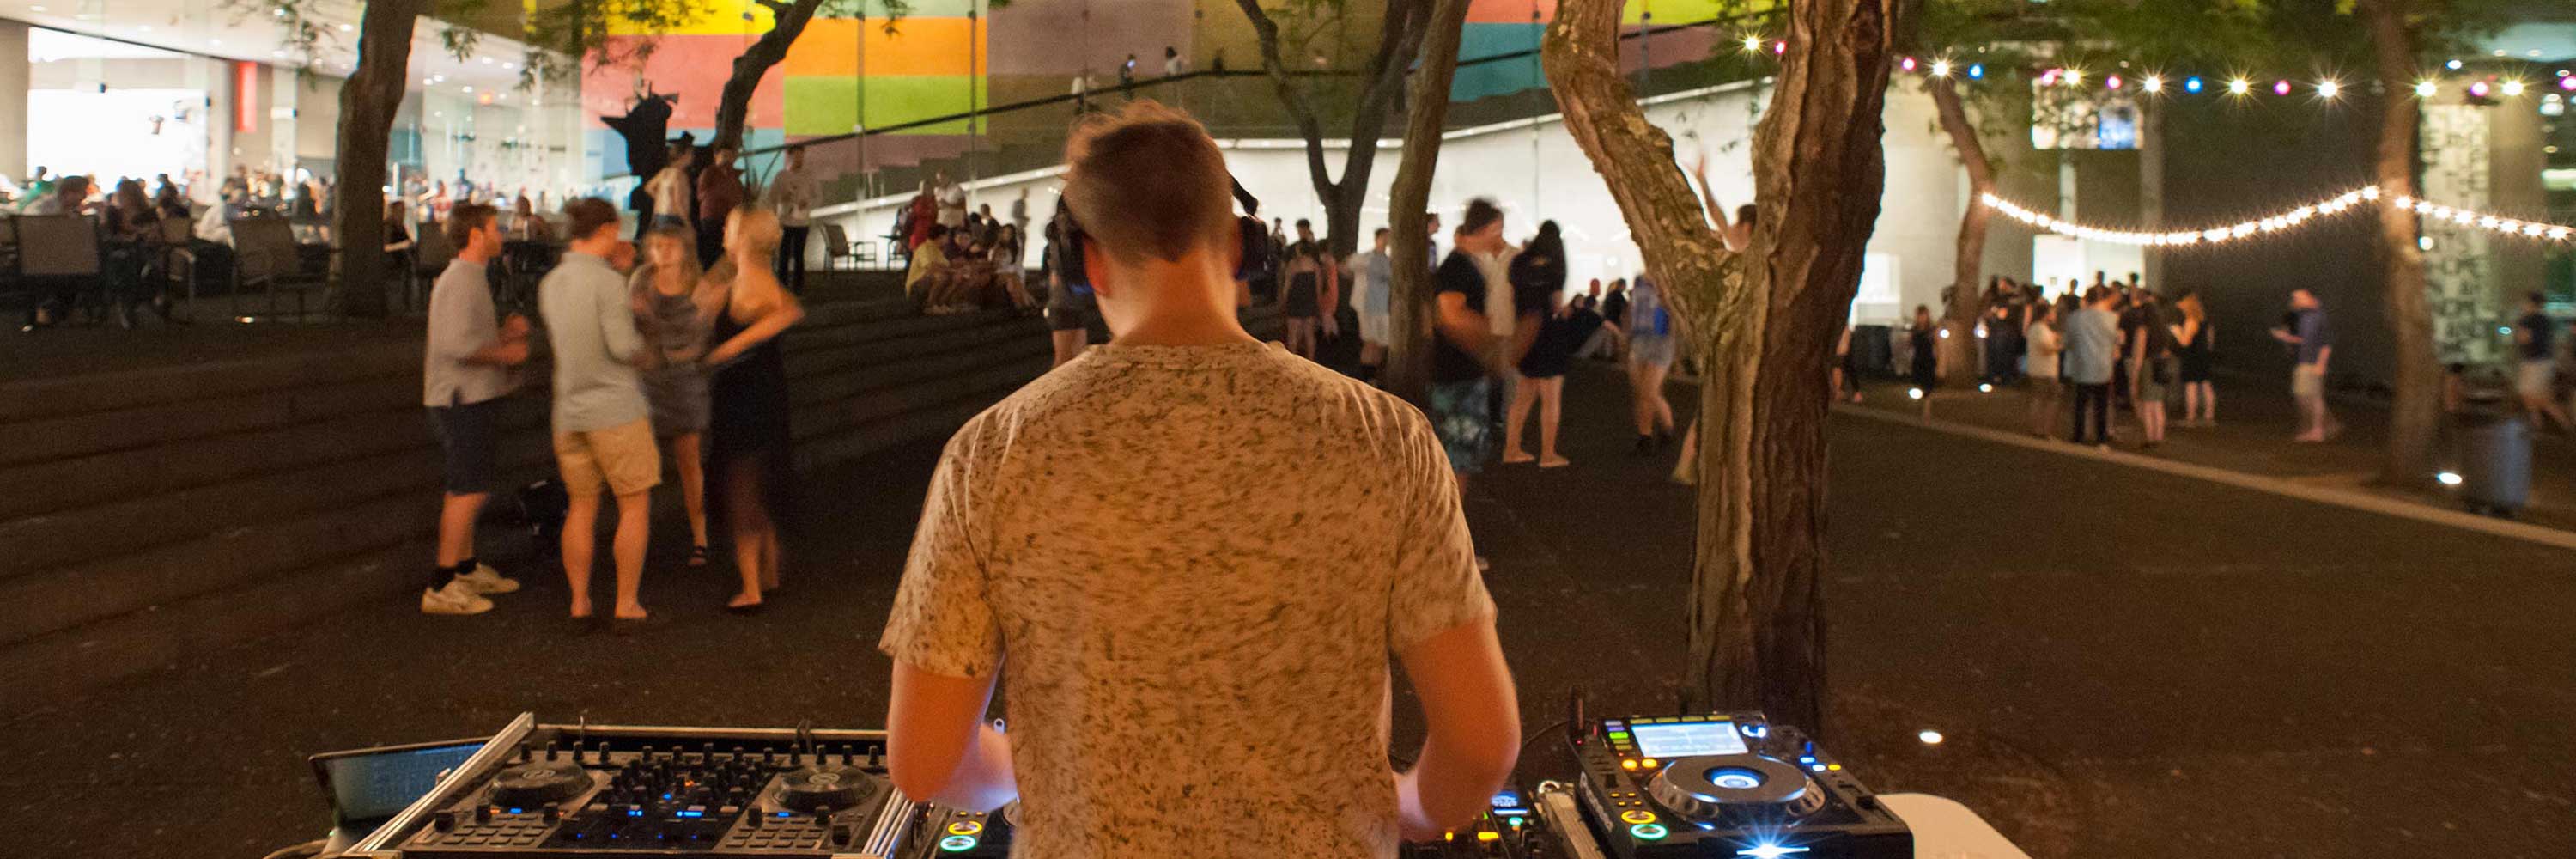 A man facing away DJ's for a crowd of people dancing outside.